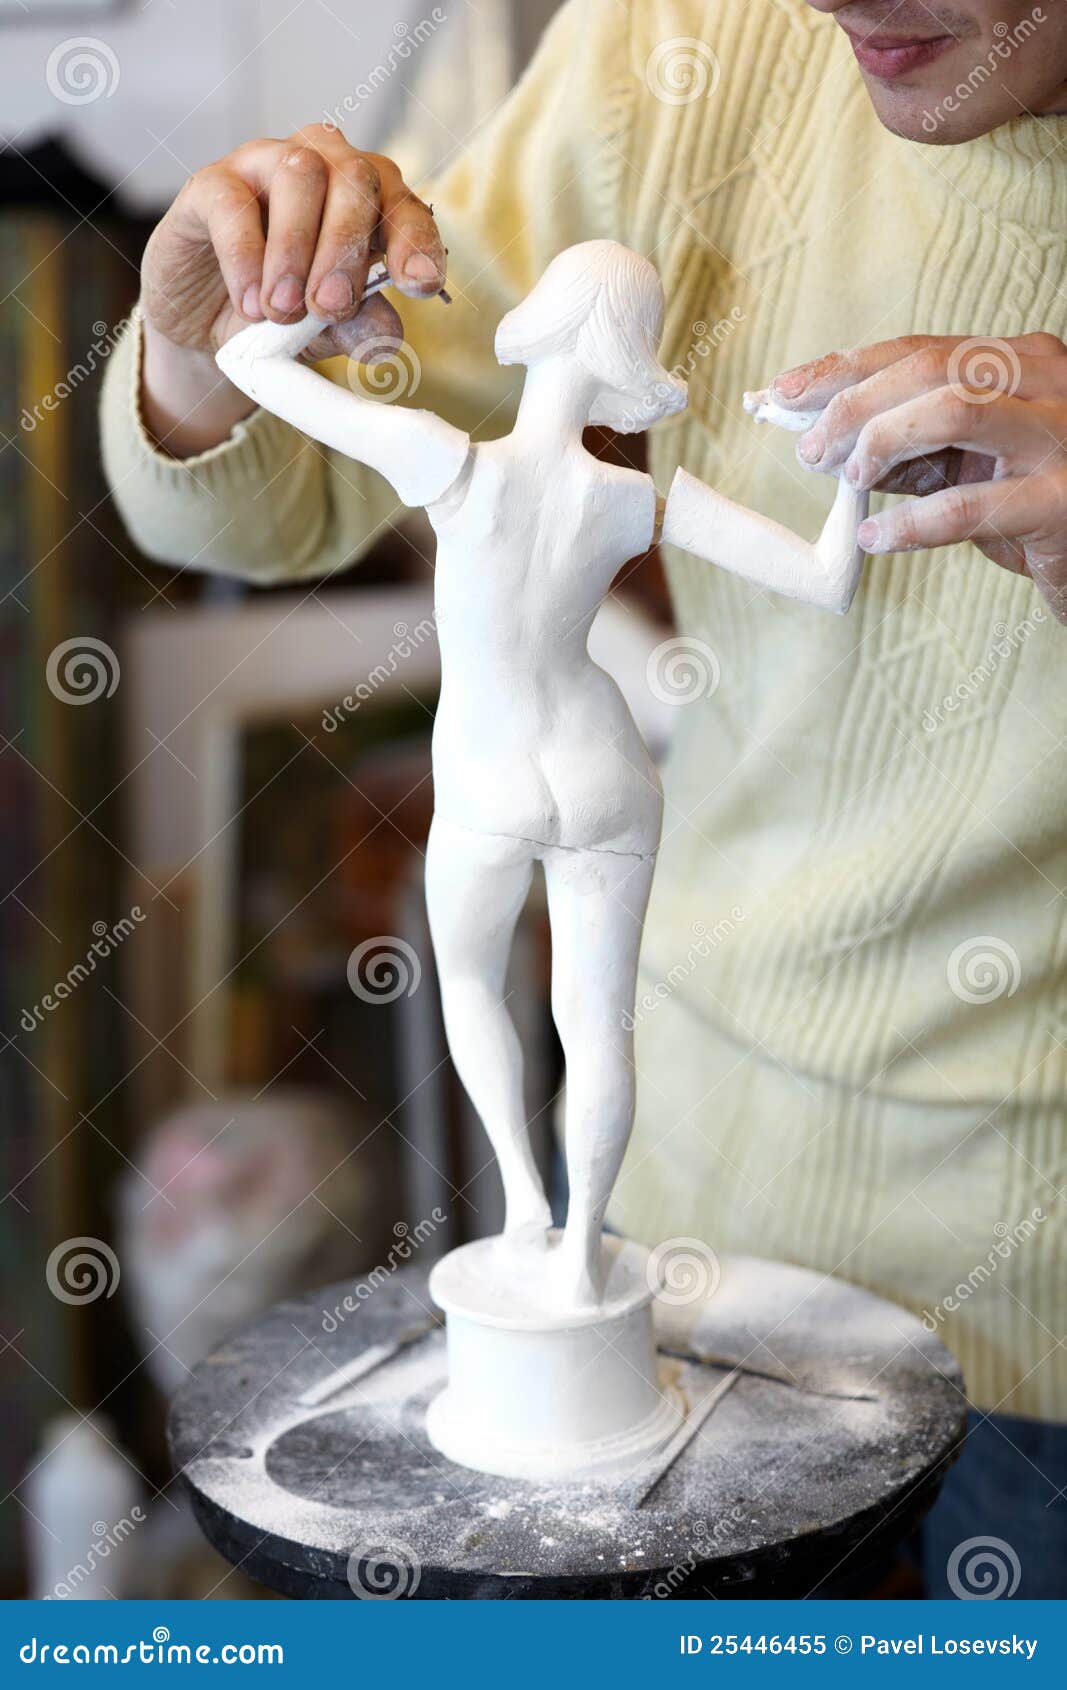 sculptor attach arms to armless statuette.